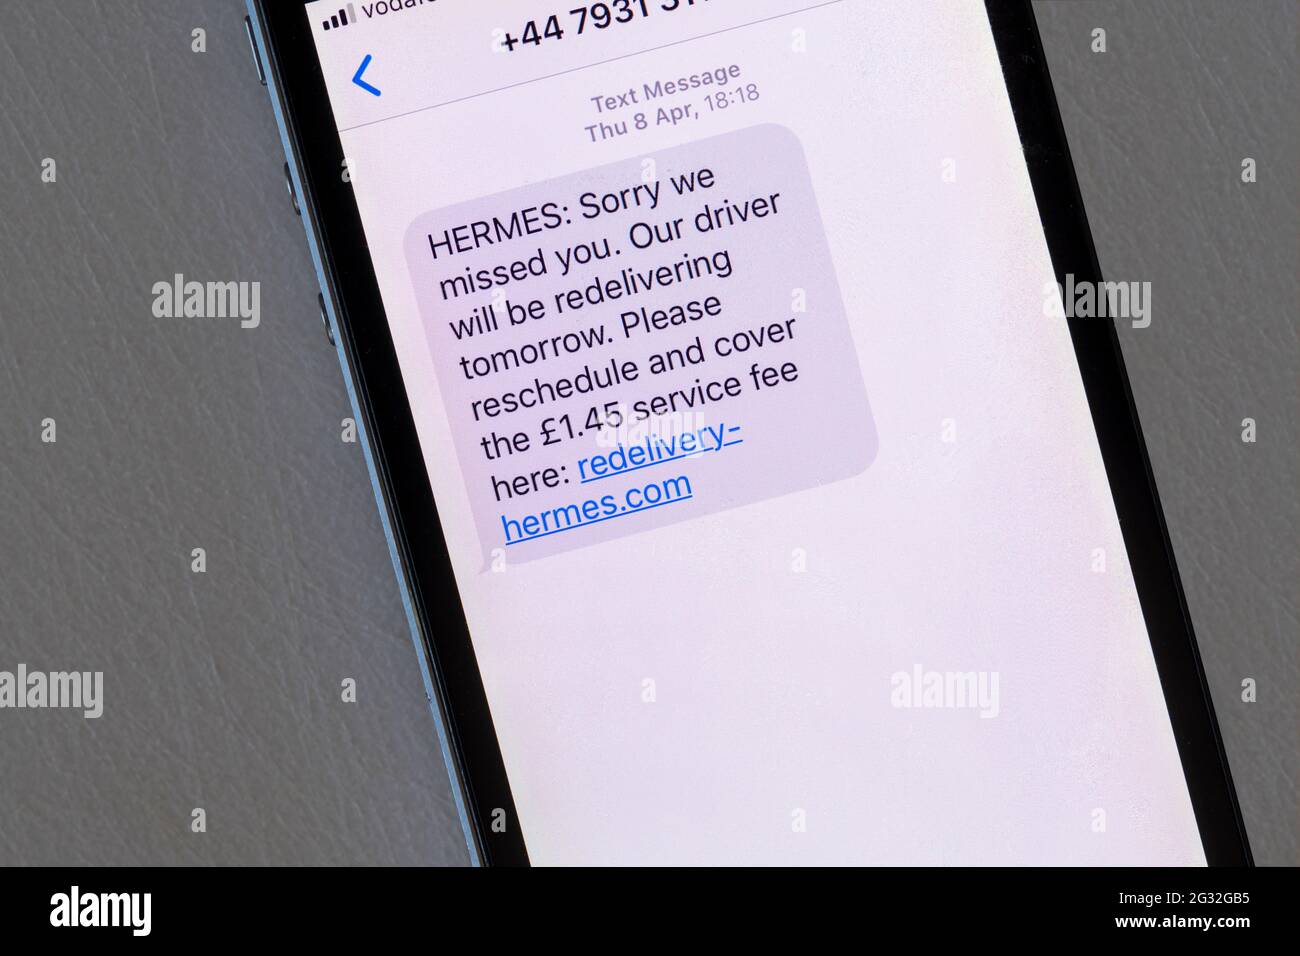 A scam message displayed on an iphone that pretends to be from a delivery company, asking for a service fee. Stock Photo